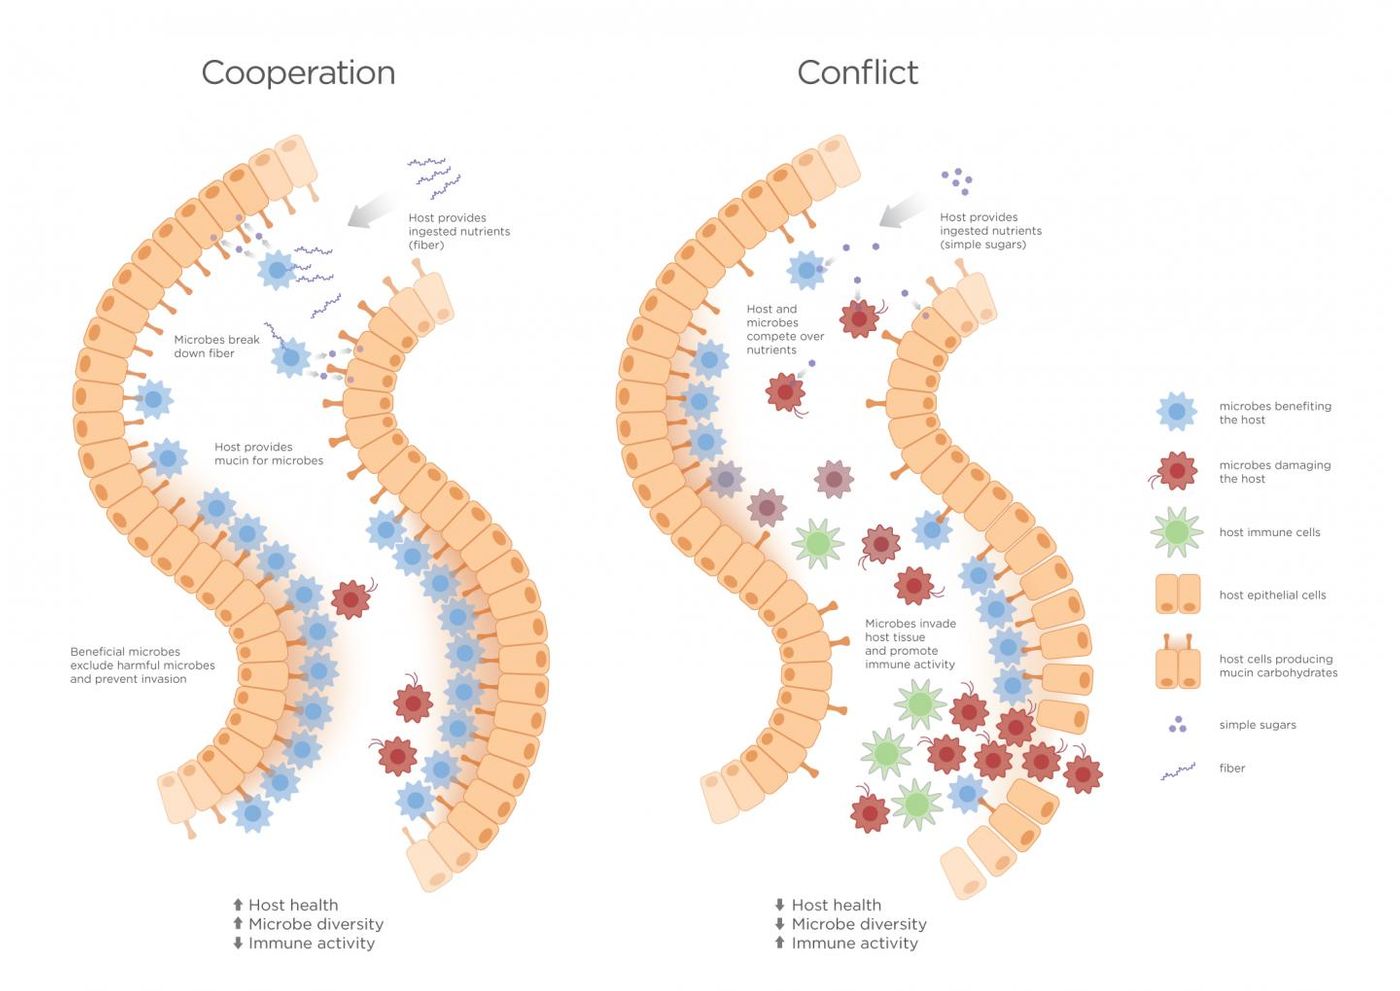 Reduction of conflict can lower costs associated with conflict to both host and microbiota. Host immune tolerance may have evolved as a way of managing conflict, reducing destructive host inflammation and microbiota virulence in the microbiome. Graphic by Jason Drees for the Biodesign Institute.